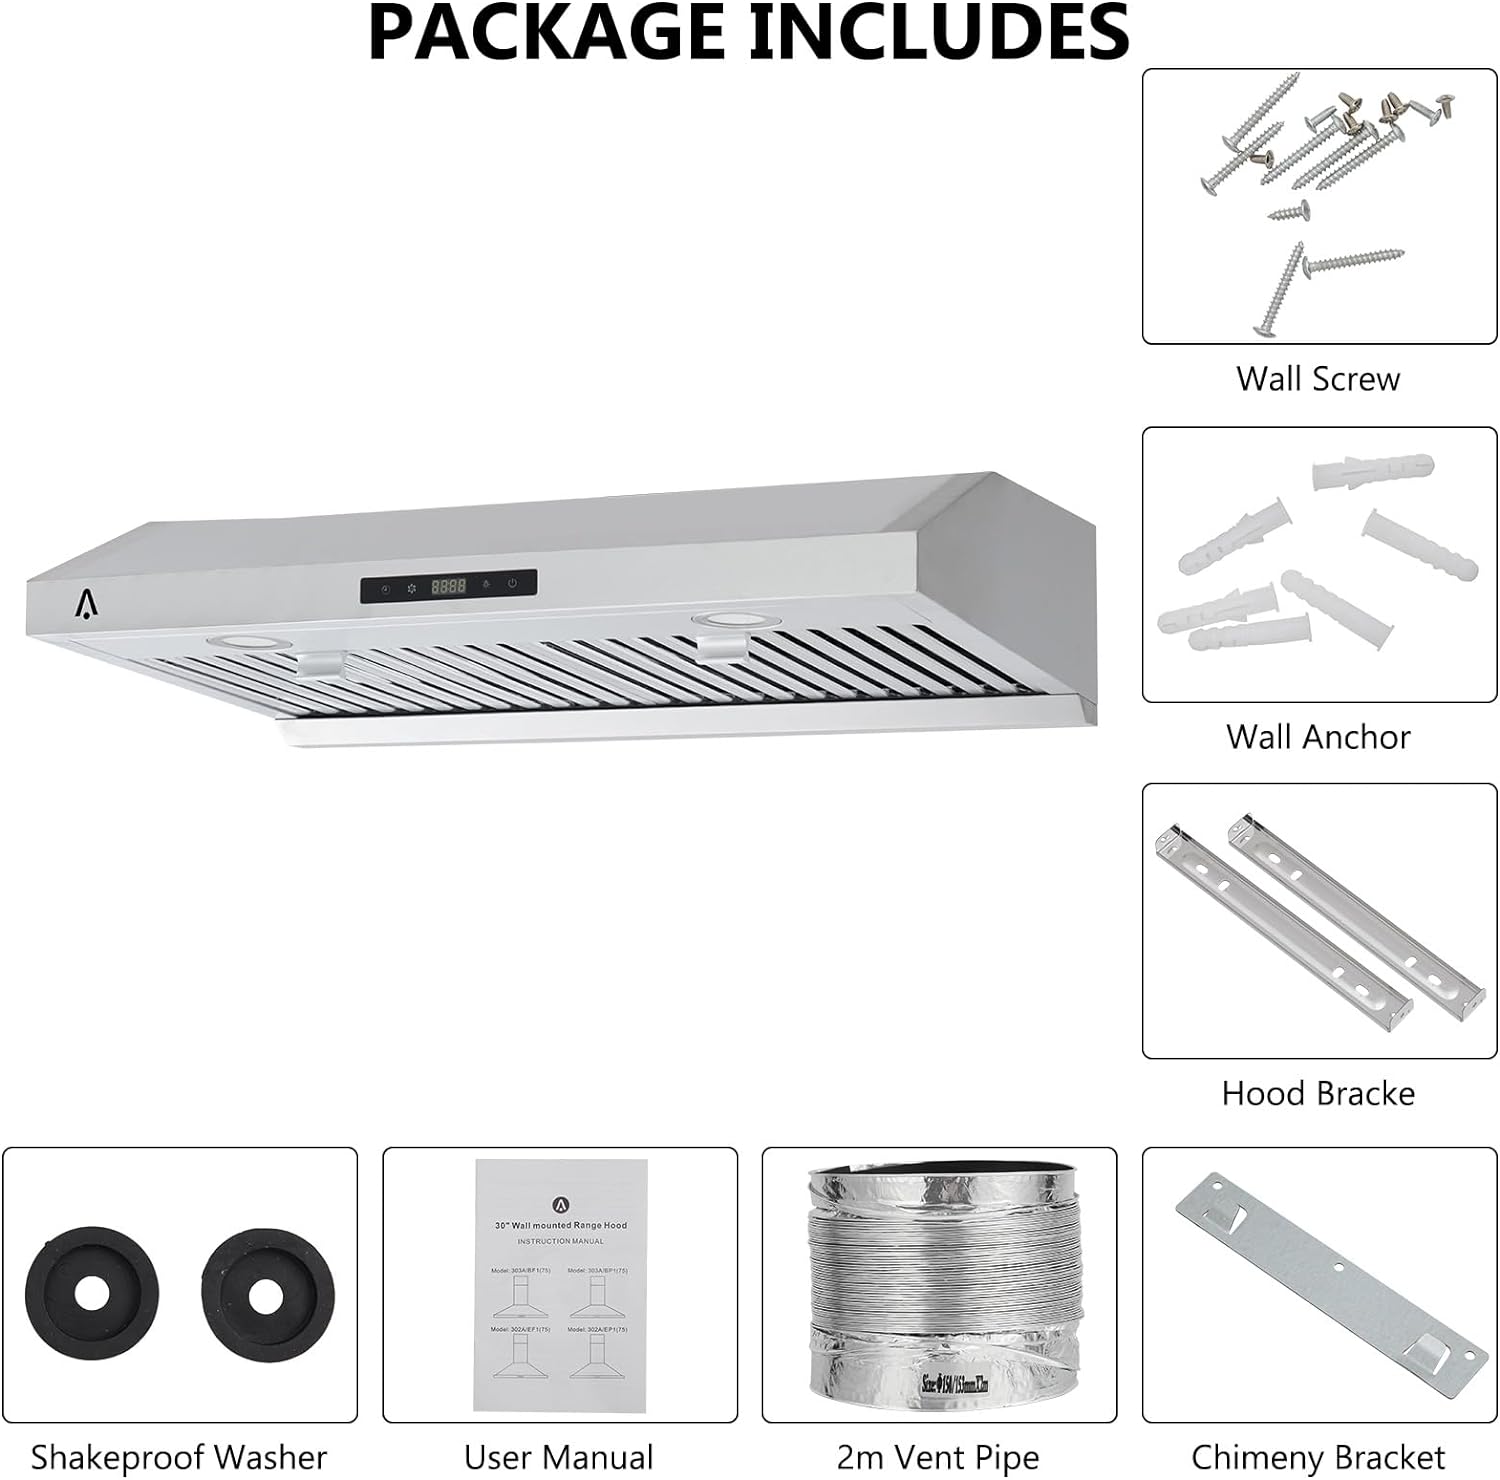 30 Inch Under Cabinet Range Hood, Stainless Steel Stove Vent Hood, 3 Speed, Touch Screen, Dishwasher Safe Baffle Filter, LED Light, 400 CFM Powerful Suction